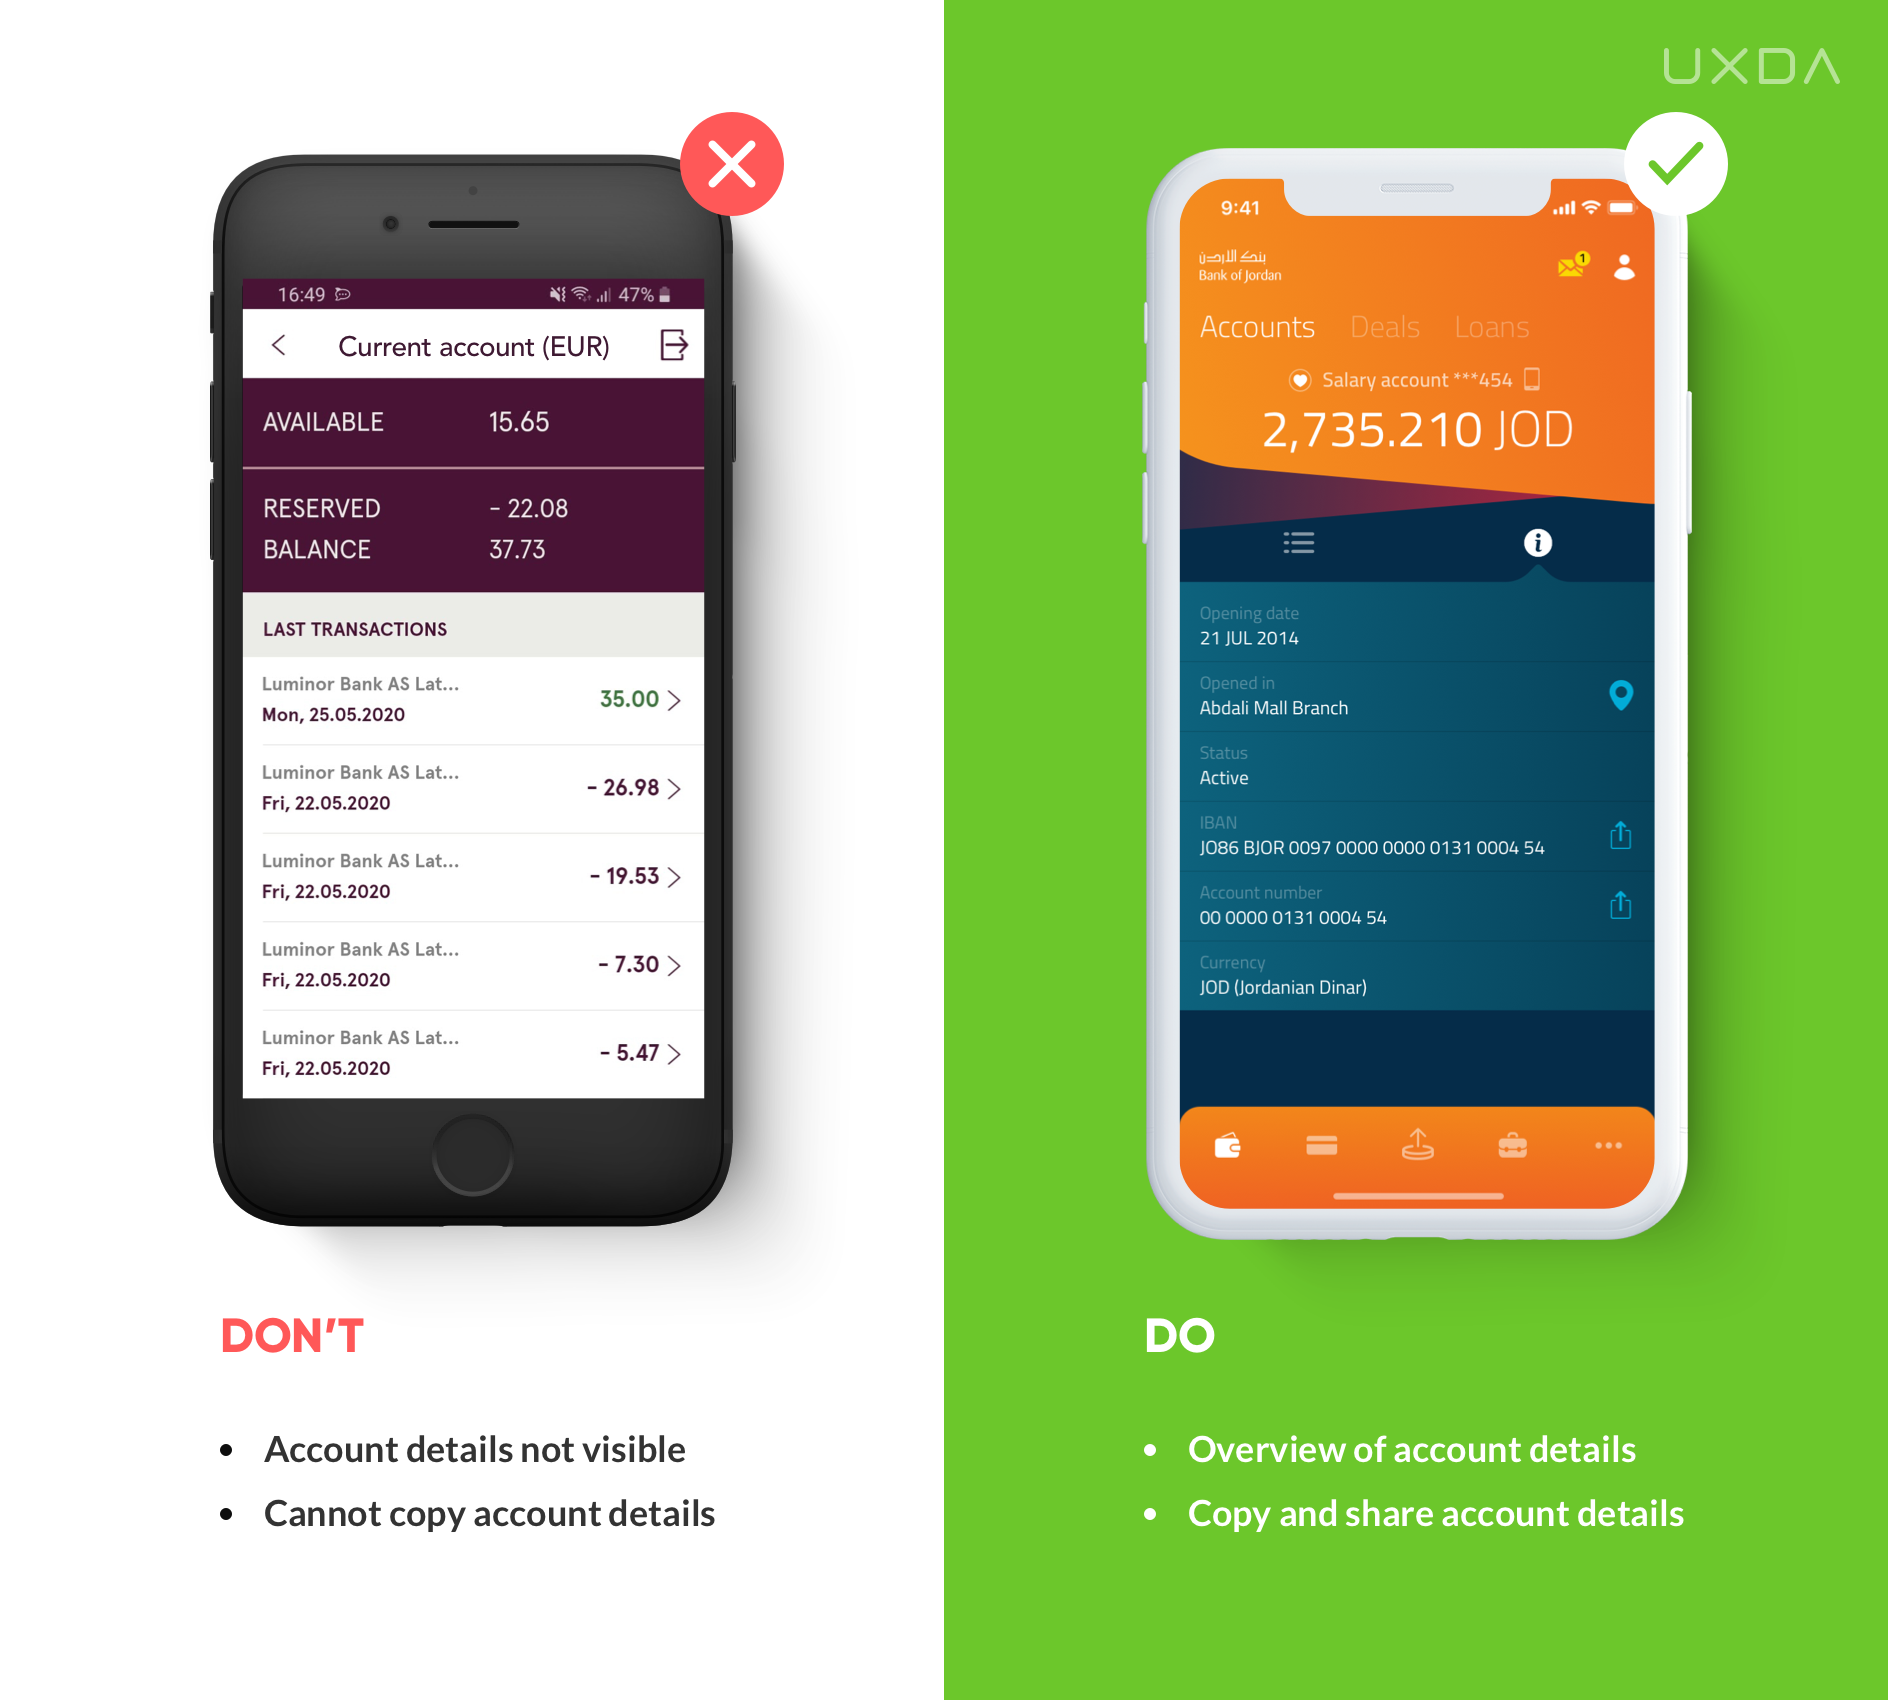 Fintech UX / UI Guide: TOP 20 Tips to Improve Mobile Banking Solutions Design - Account details